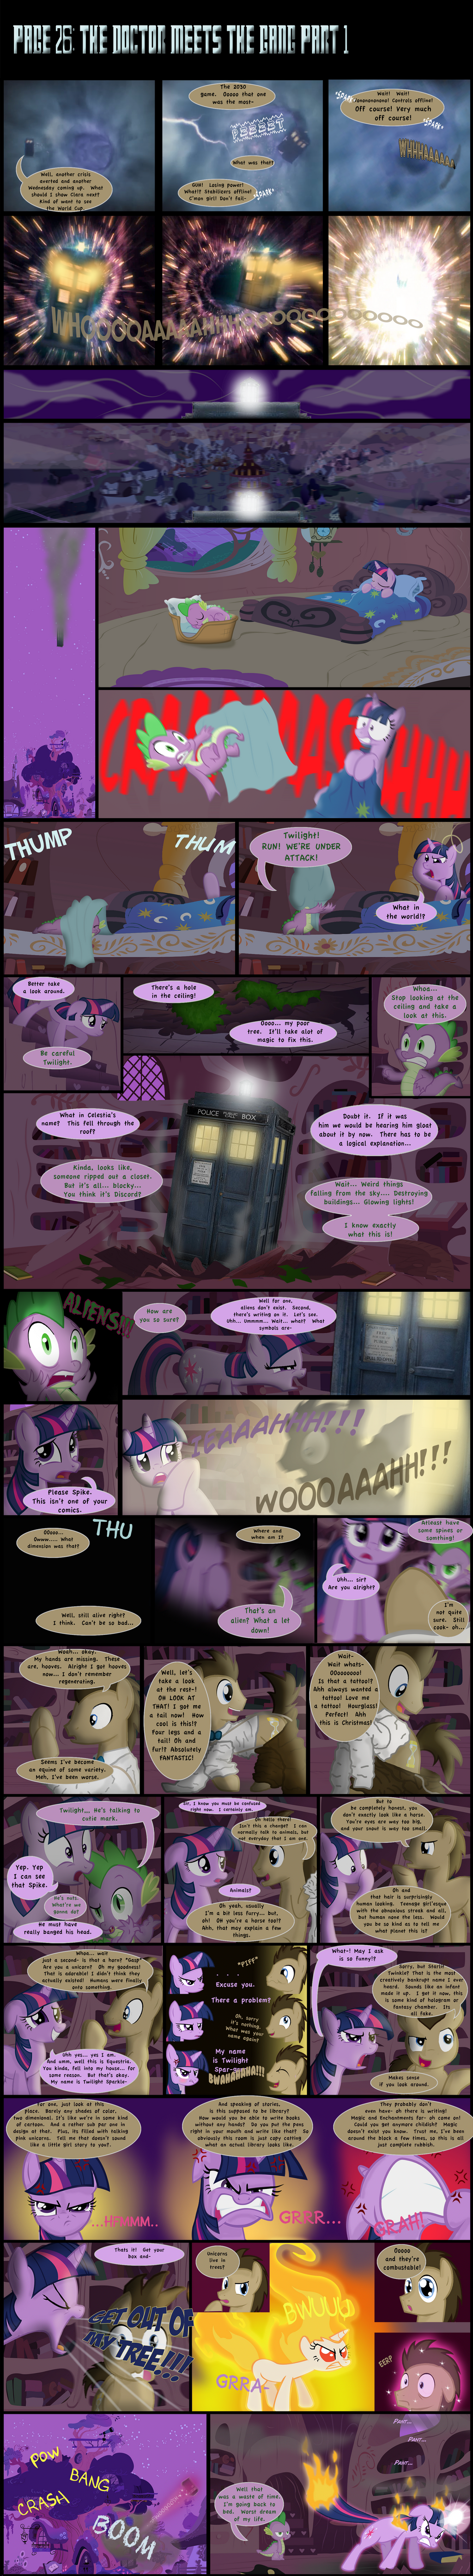 [Obrázek: dr__whooves__page_26_by_shwiggityshwah-d6h5qd8.png]